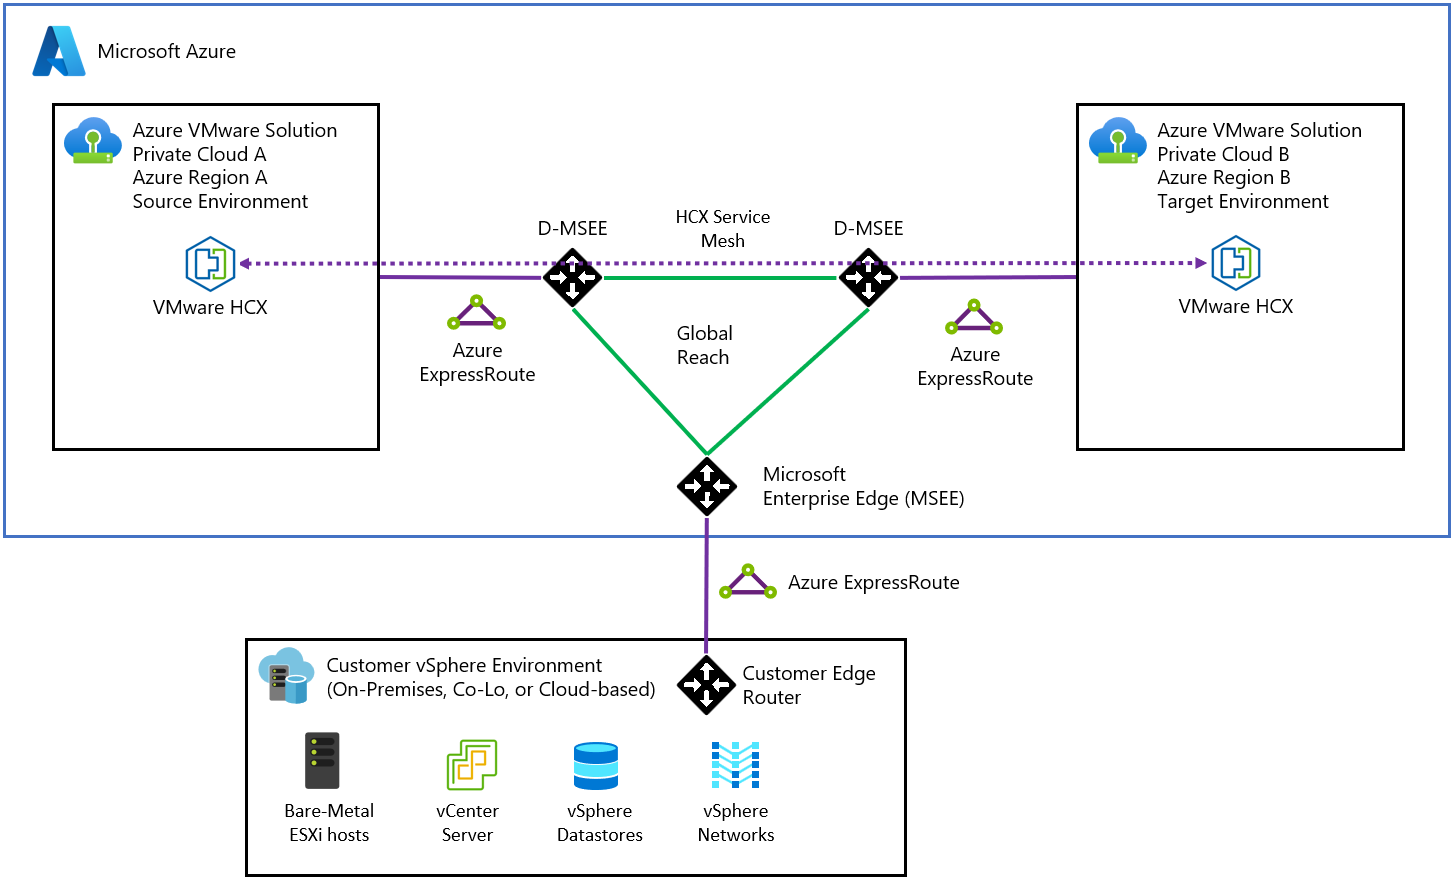 Diagram showing ExpressRoute Global Reach communication between the source and target Azure VMware Solution environments.